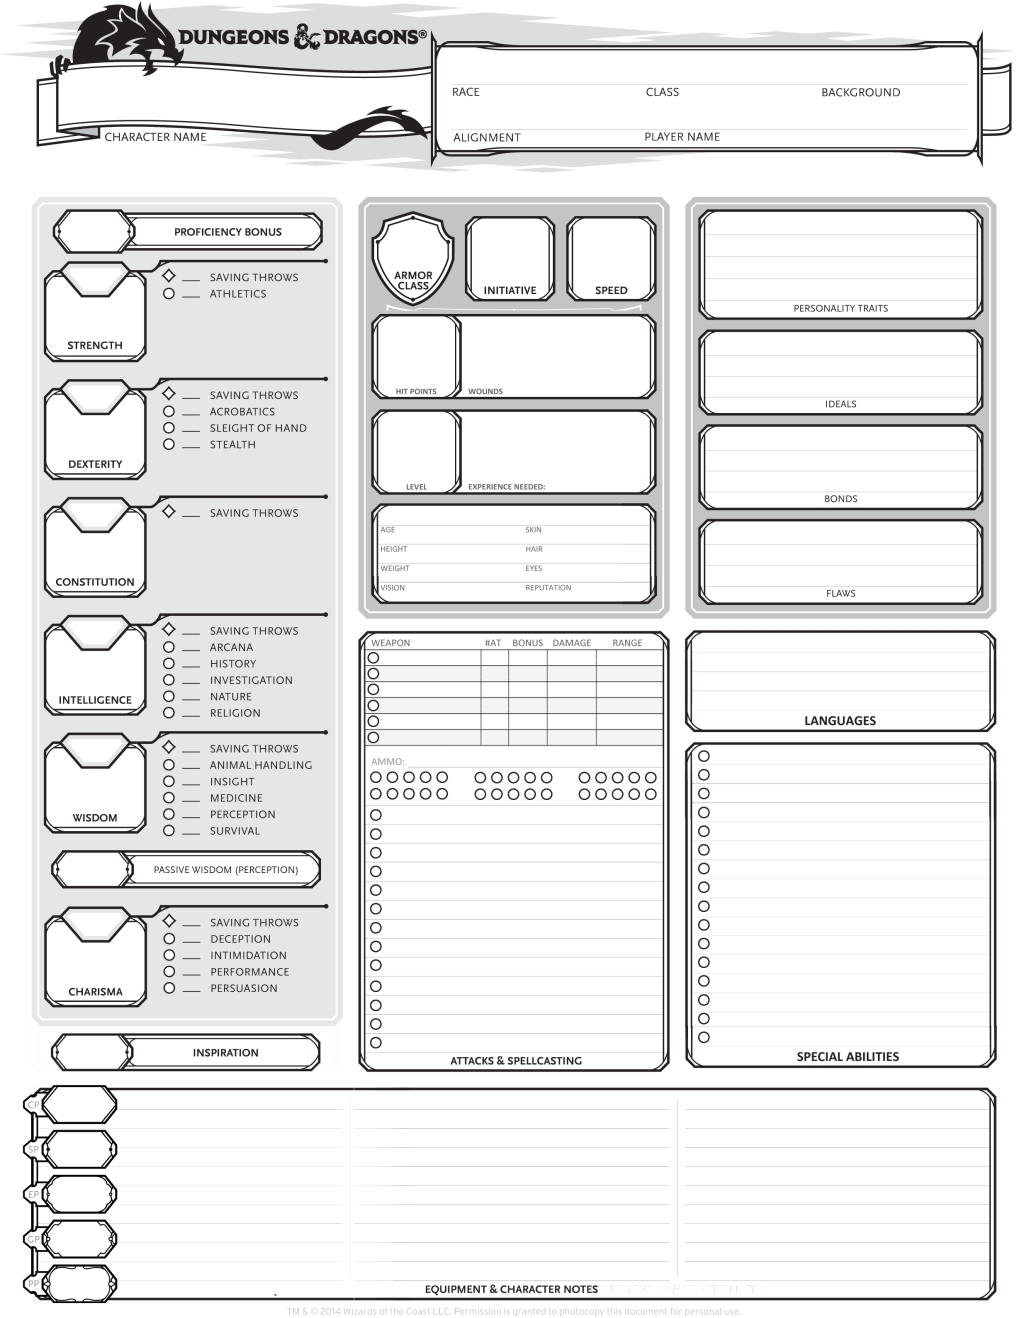 Dungeons & Dragons 5th Edition Character Sheet